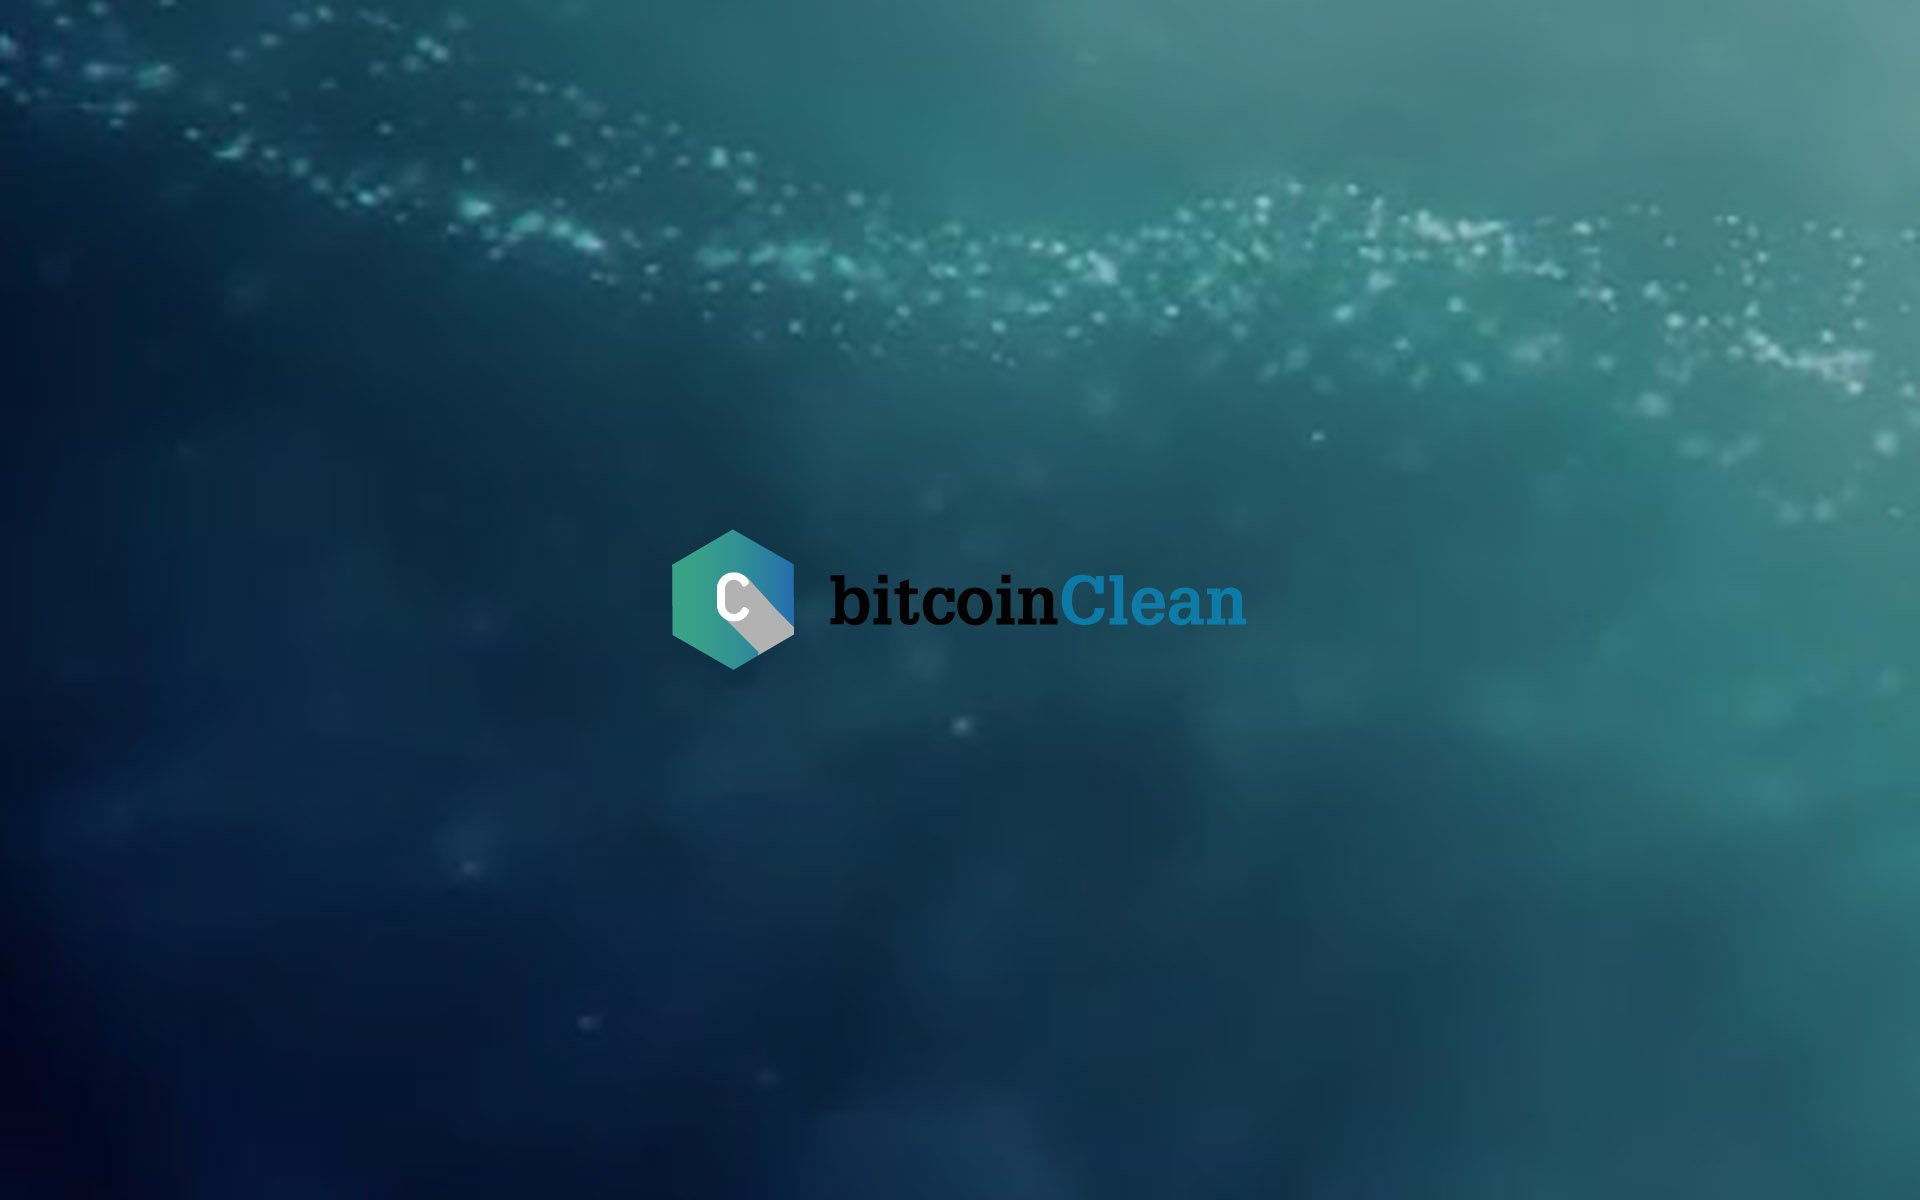 bitcoinClean - the First Eco-Friendly Cryptocurrency